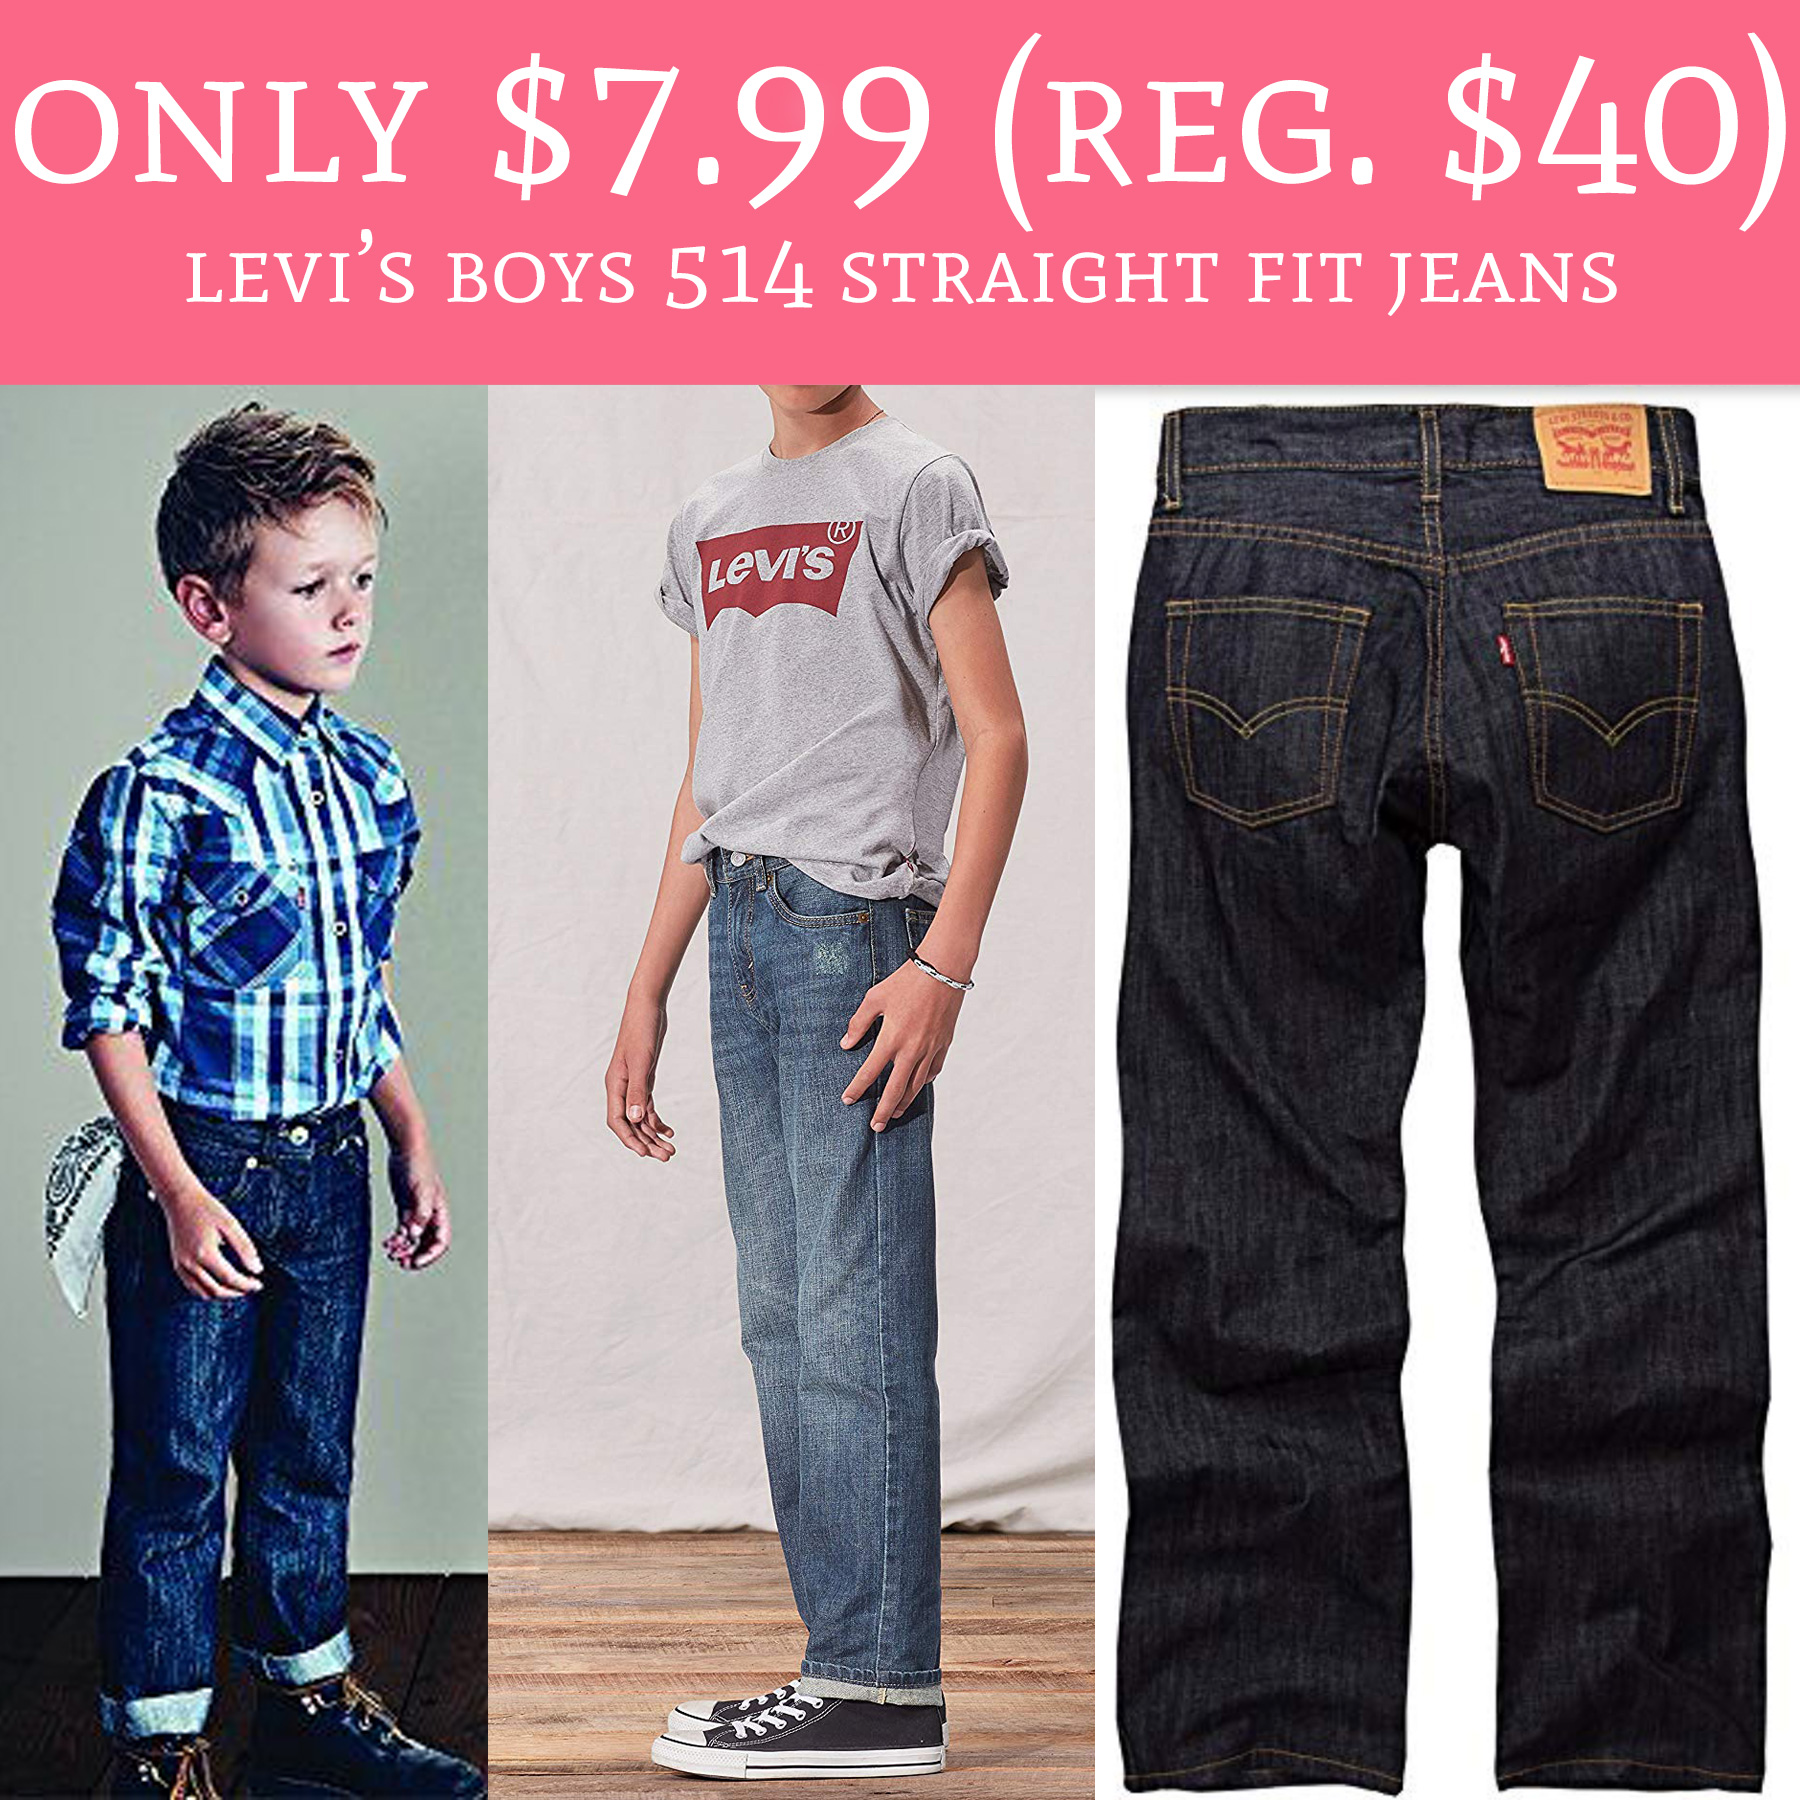 levi’s-boys-514-straight-fit-jeans